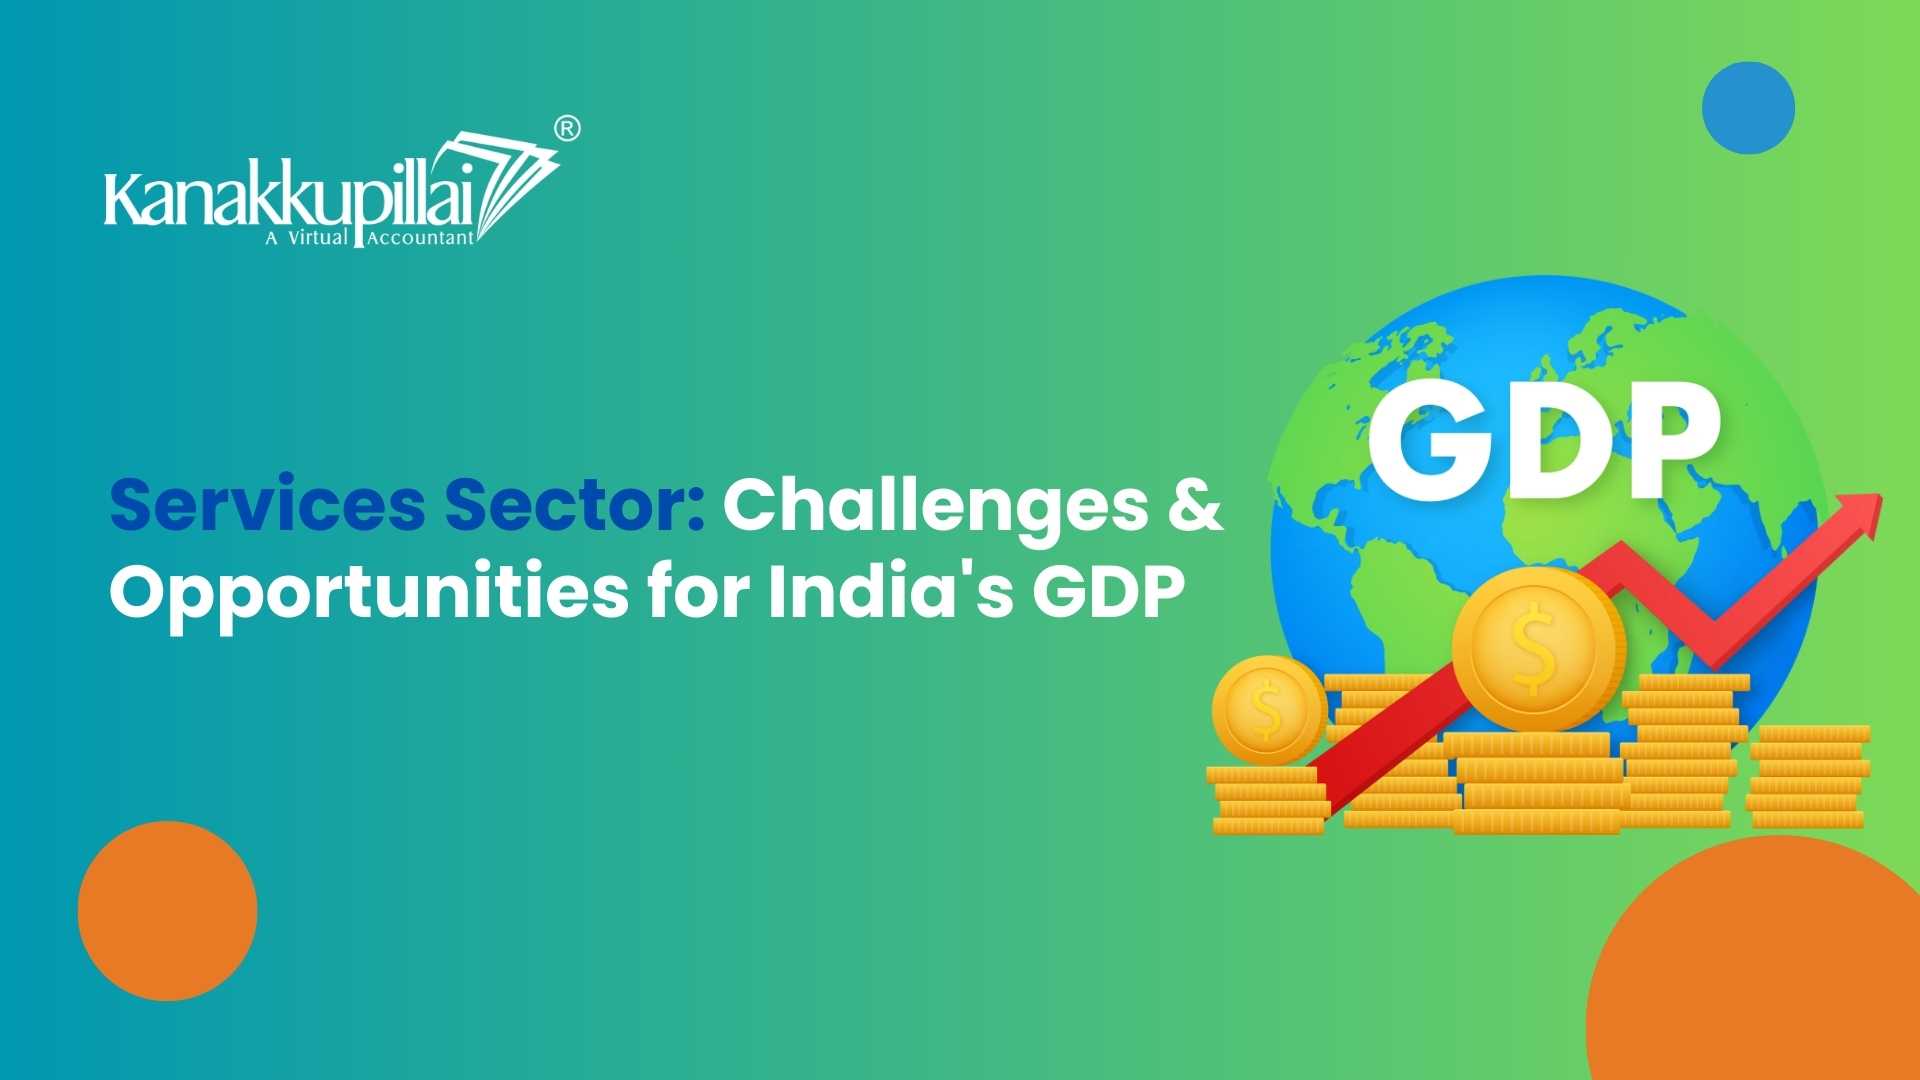 You are currently viewing Challenges and Opportunities in the Services Sector for India’s GDP